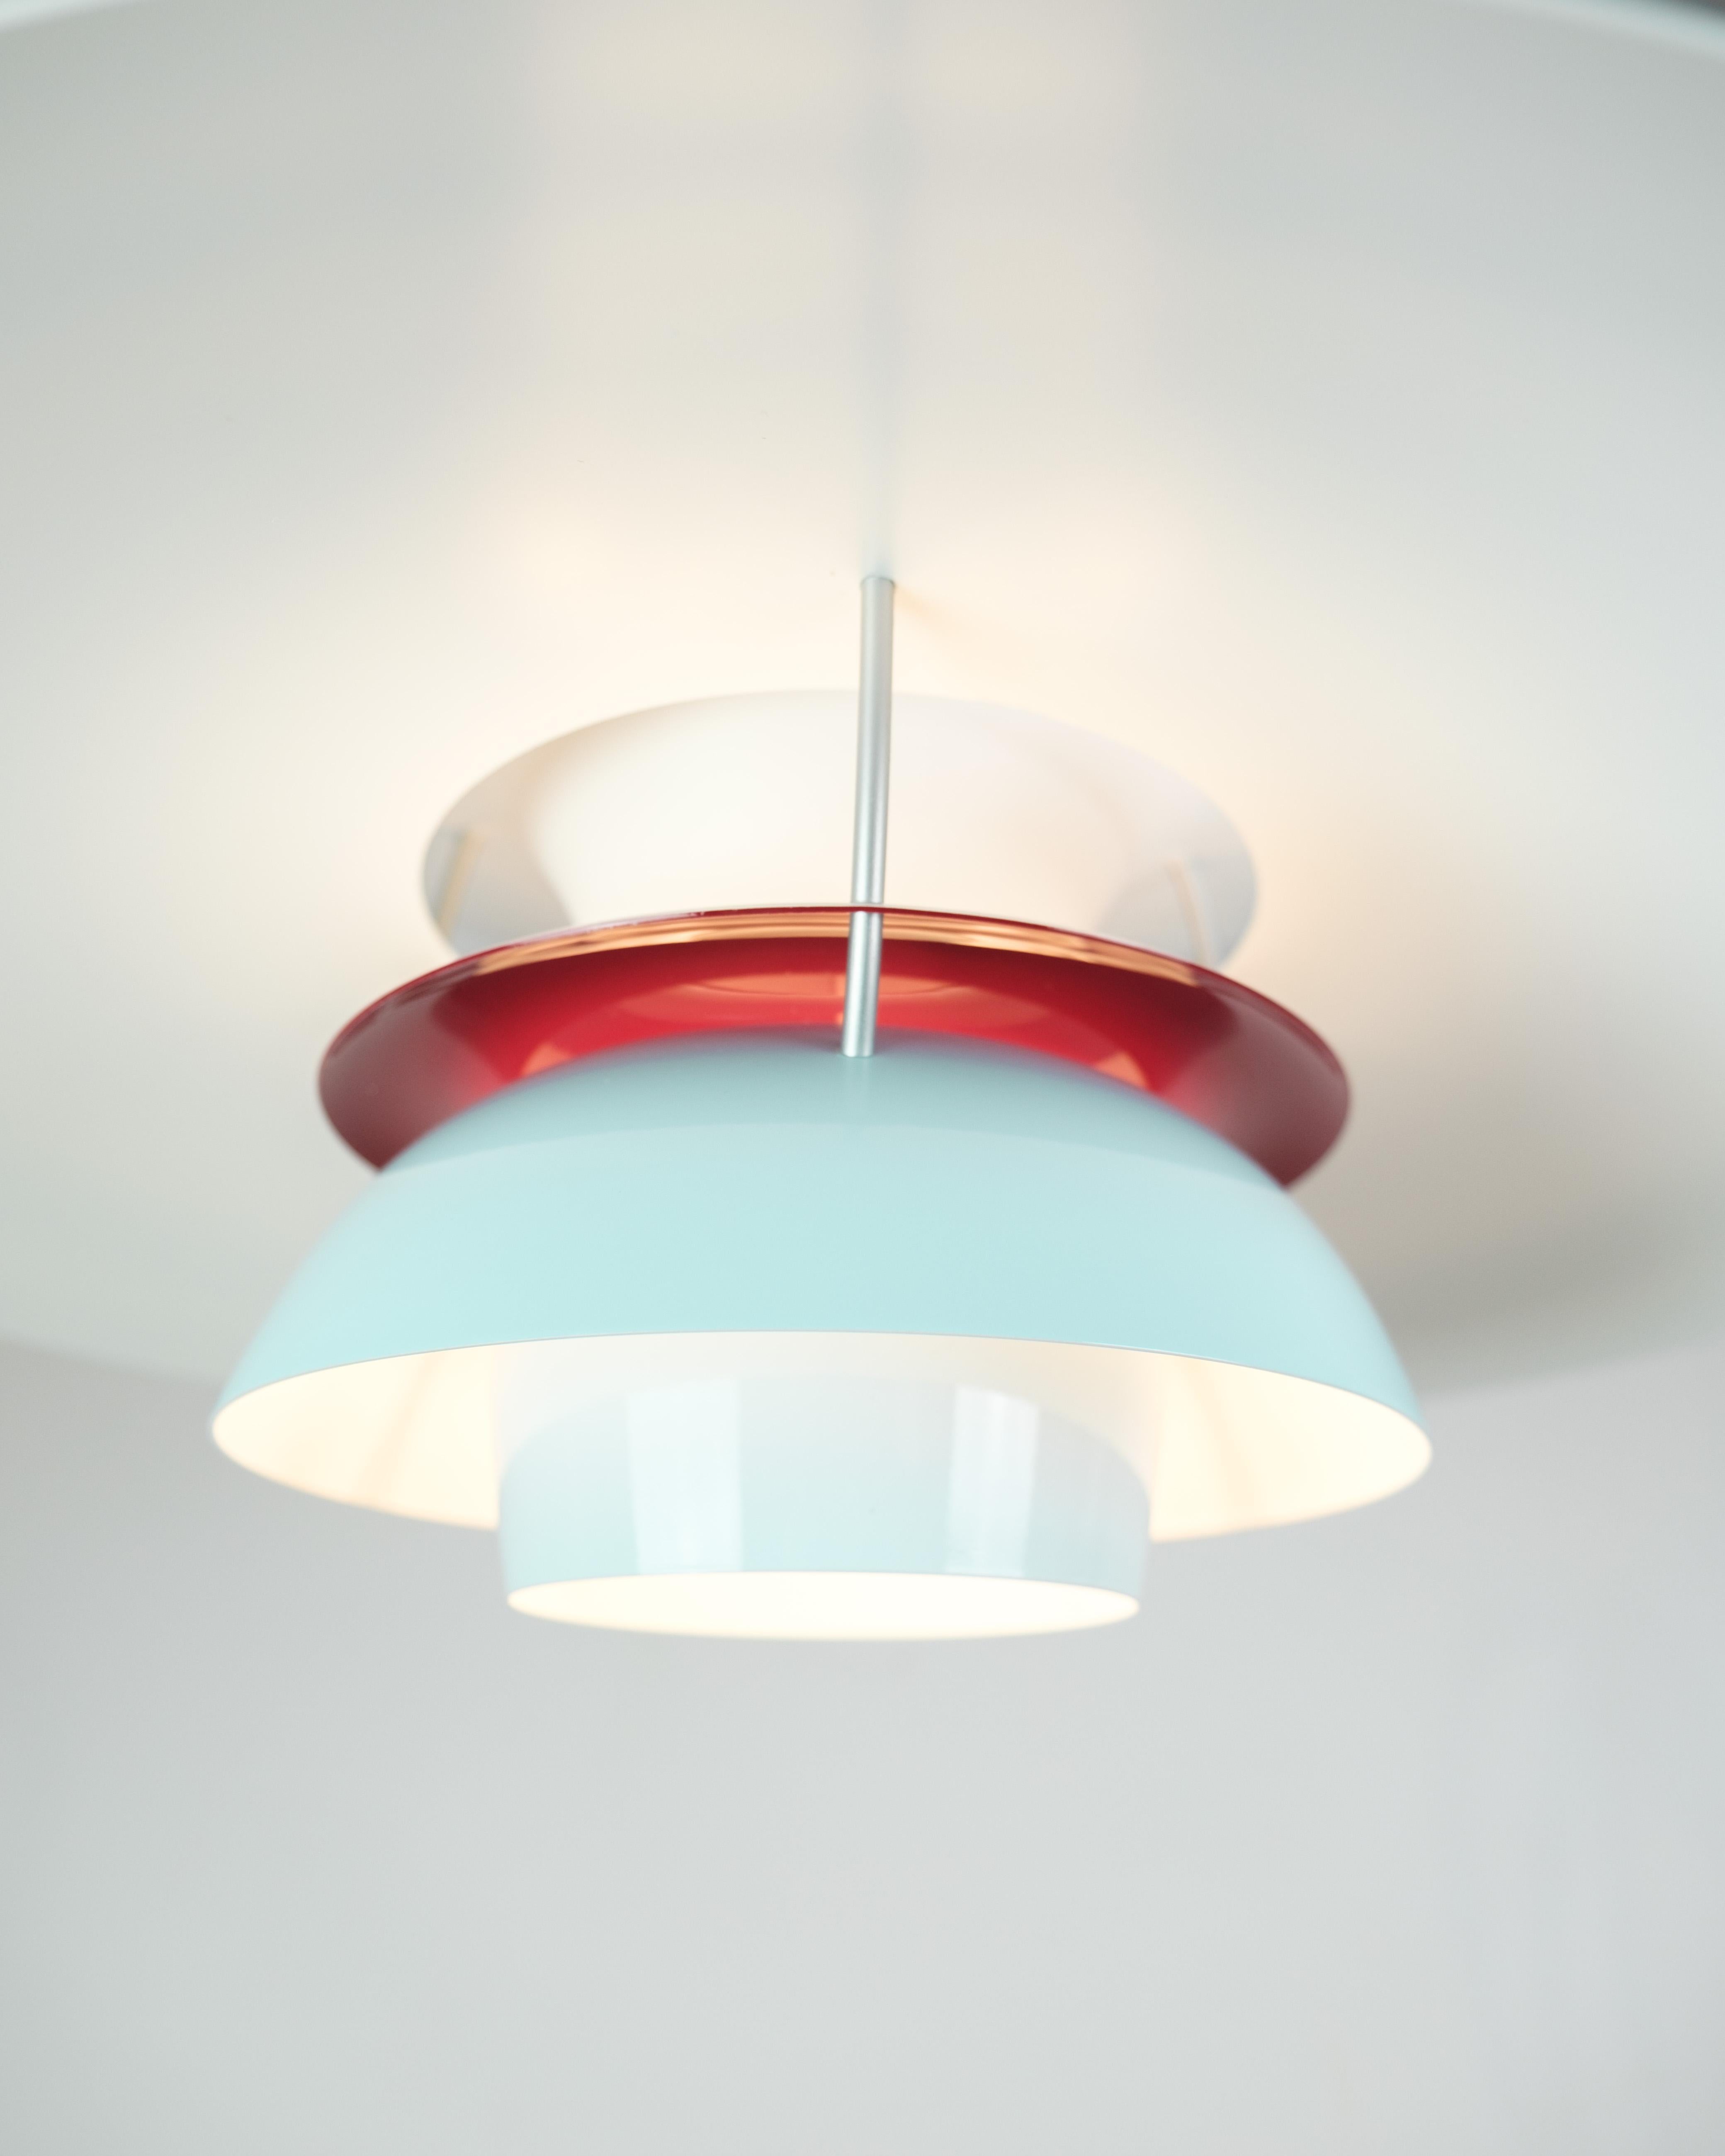 
The PH5 ceiling lamp, designed by Poul Henningsen and manufactured by Louis Poulsen, is an iconic piece of lighting design known for its innovative form and exceptional functionality. In this special edition, the lamp comes in a charming baby blue